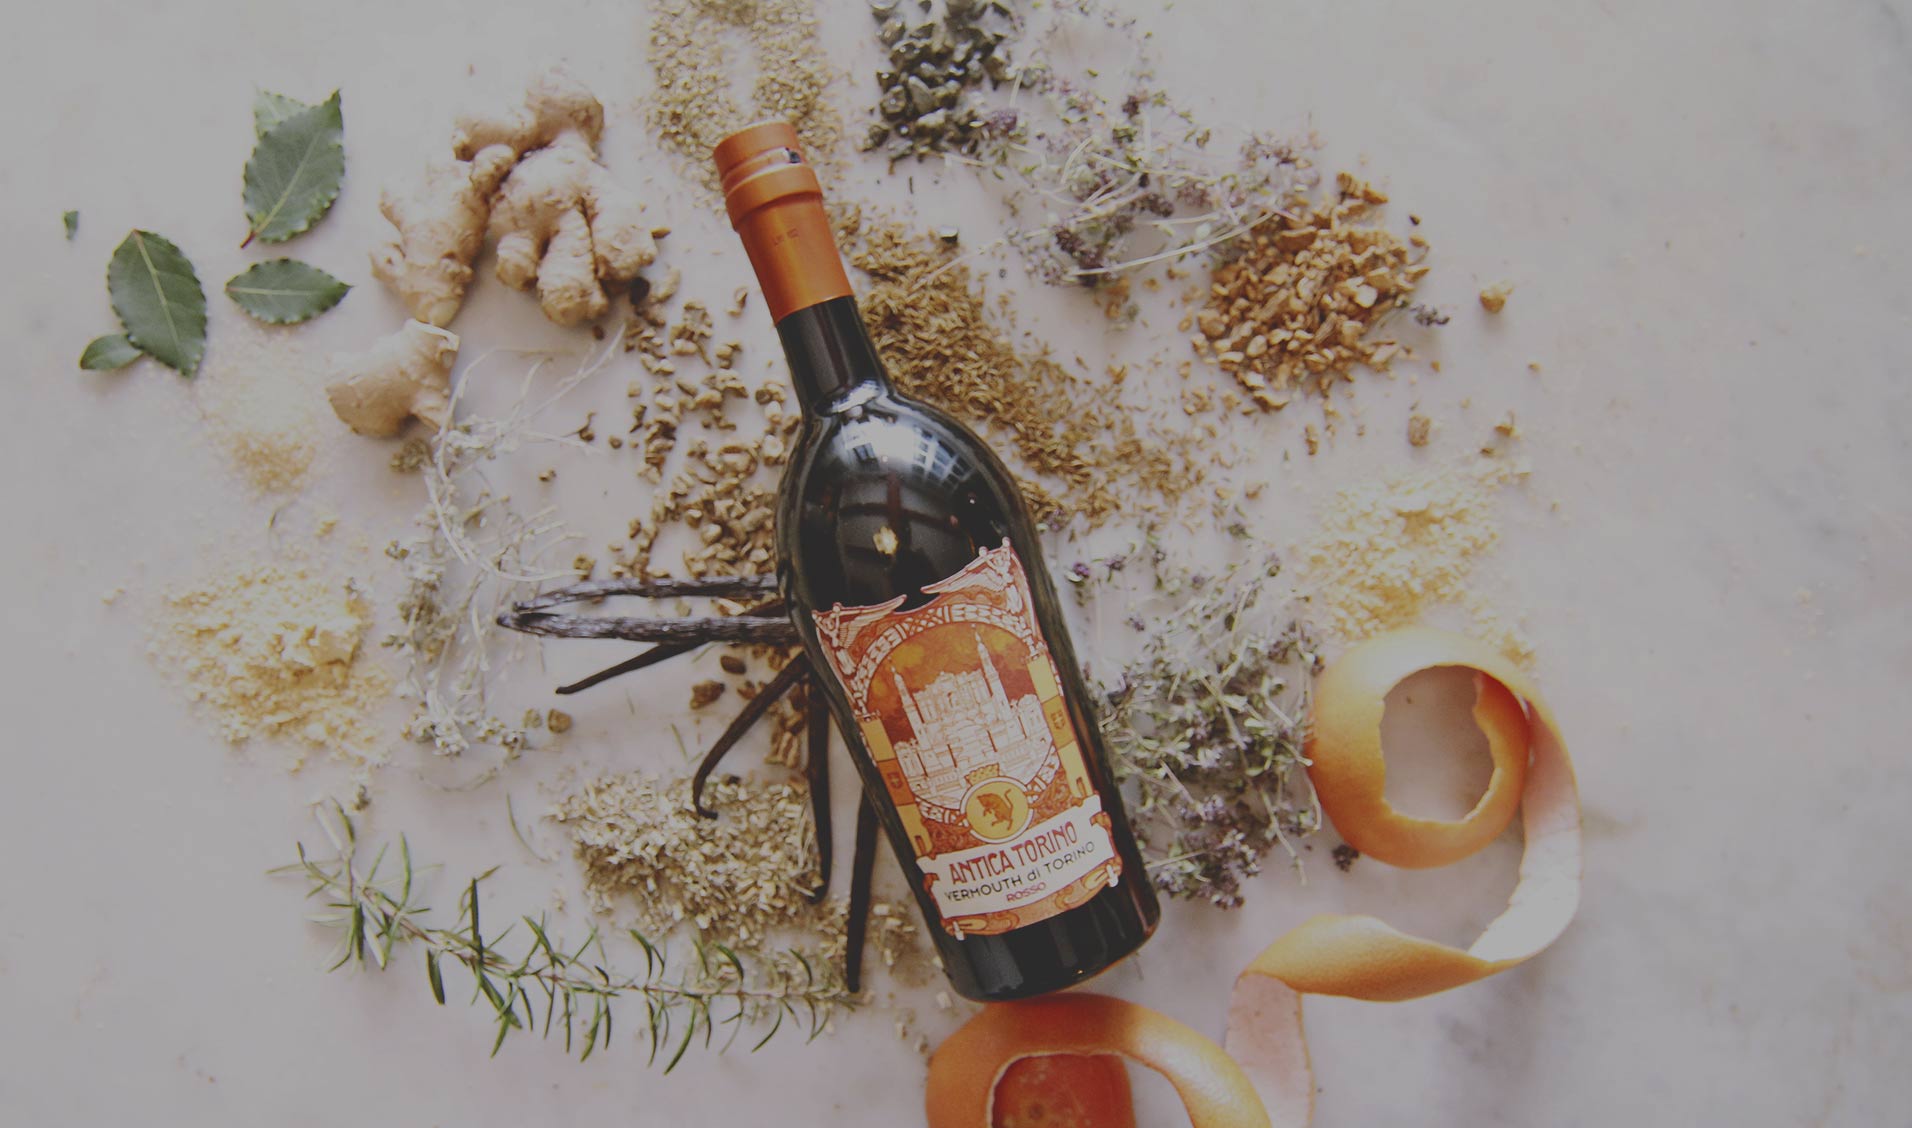 Vermouth as you’ve never tasted it before.